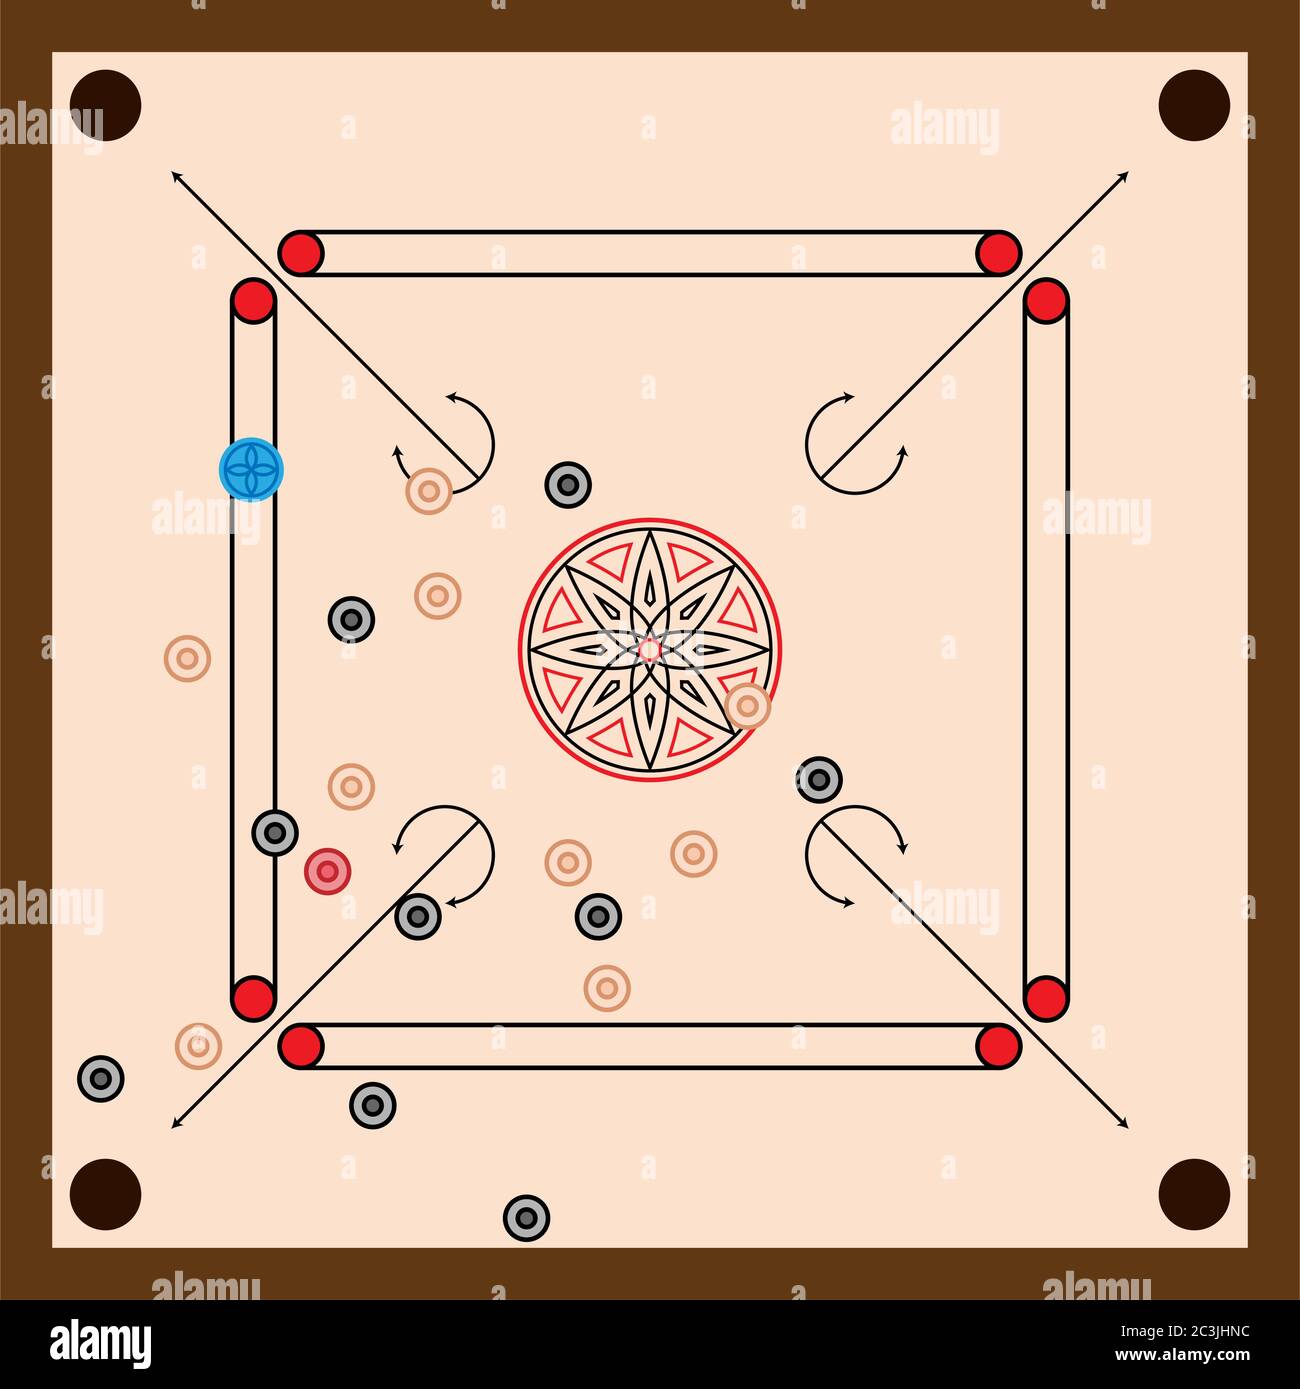 ULTIMATE GOAL CARROM BOARD with coins and striker 32X32 30 cm Carrom Board   Buy ULTIMATE GOAL CARROM BOARD with coins and striker 32X32 30 cm Carrom  Board Online at Best Prices